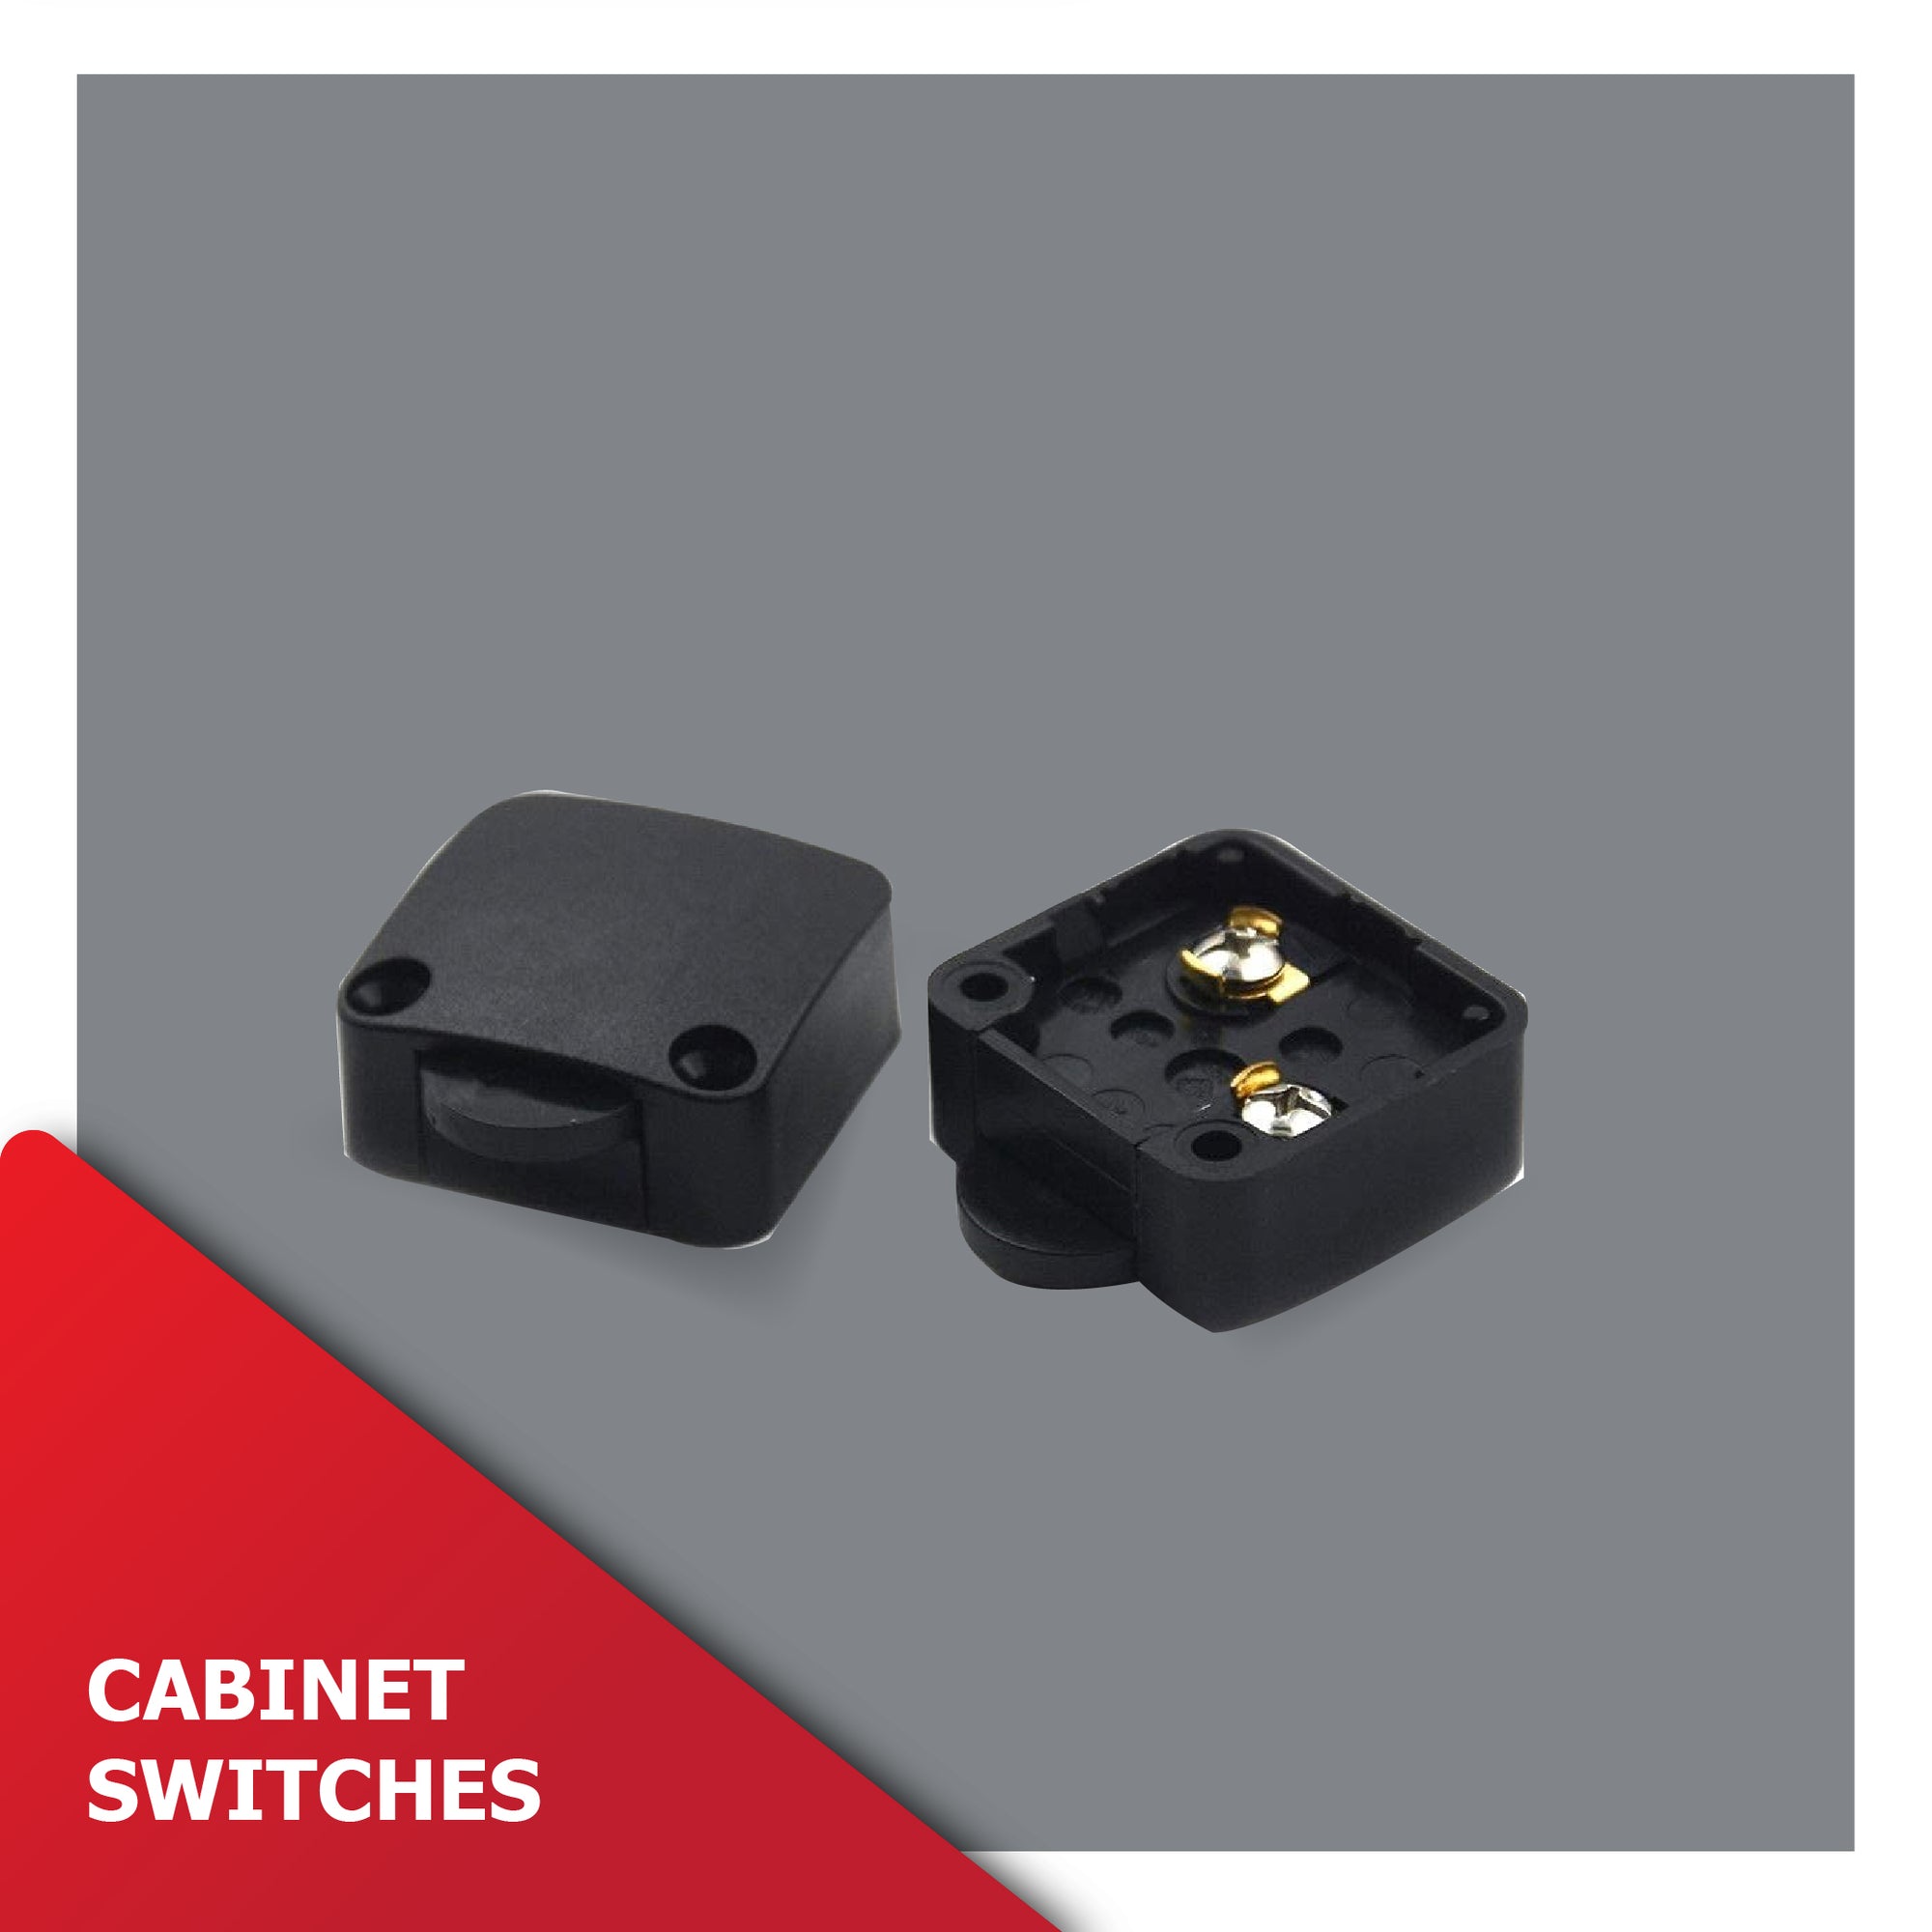 Cabinet Switches | Category